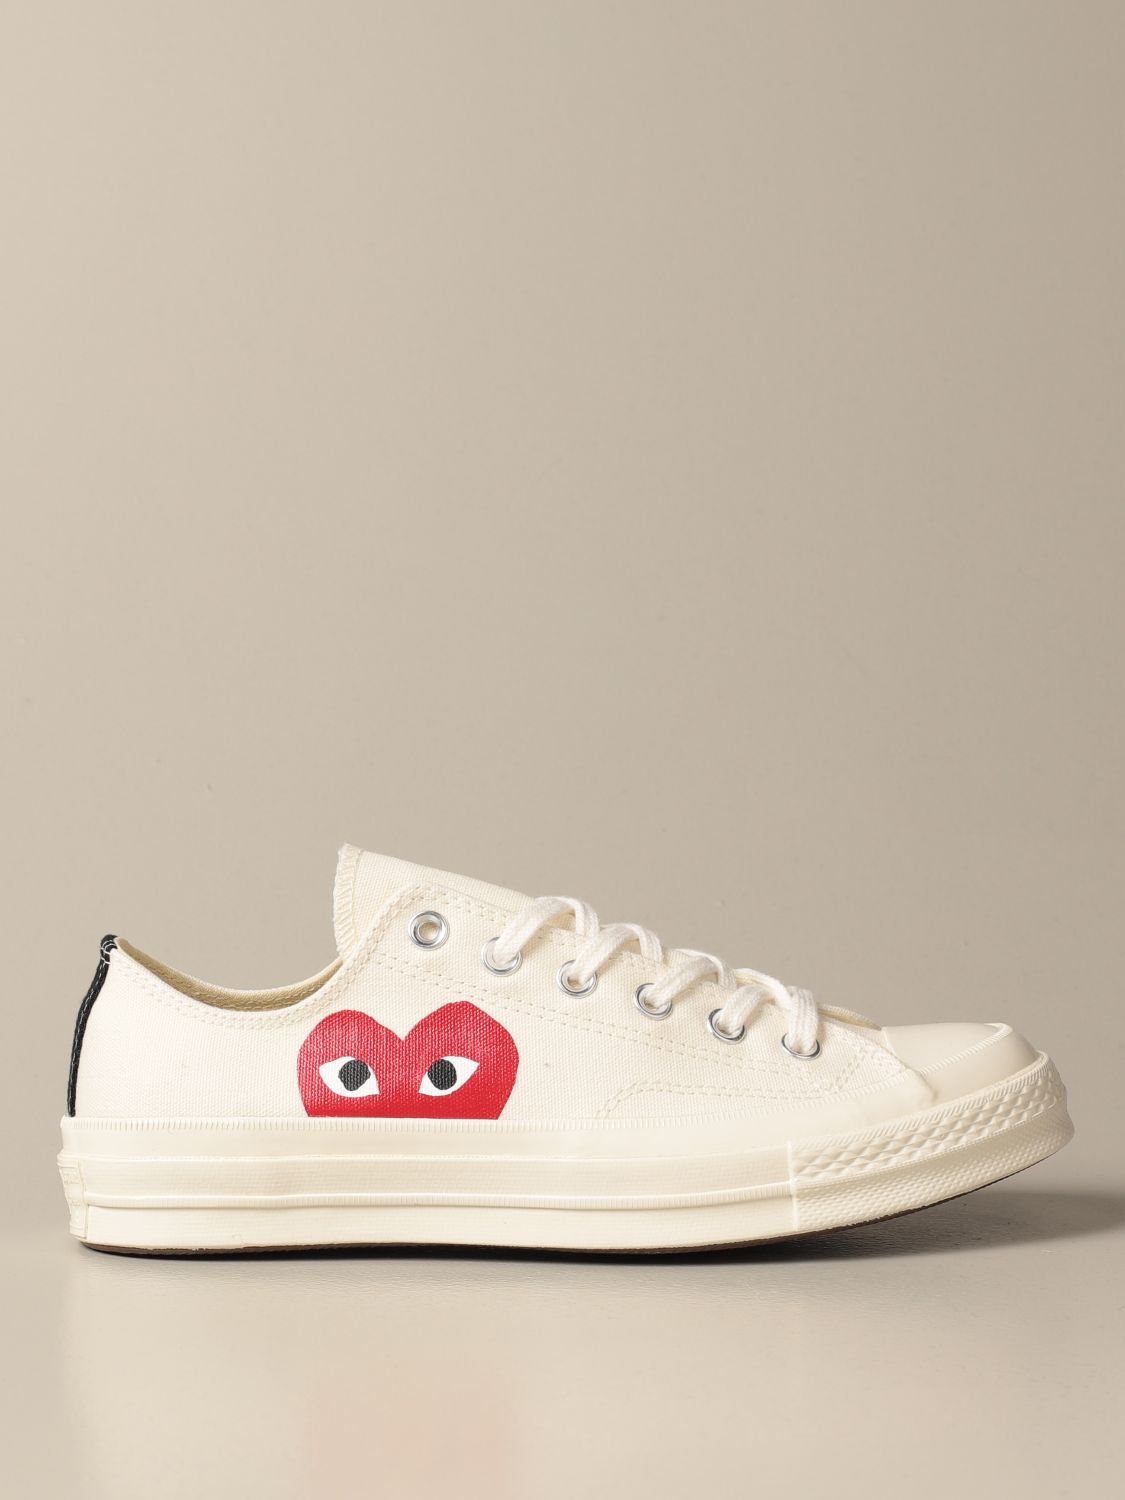 garcons play shoes